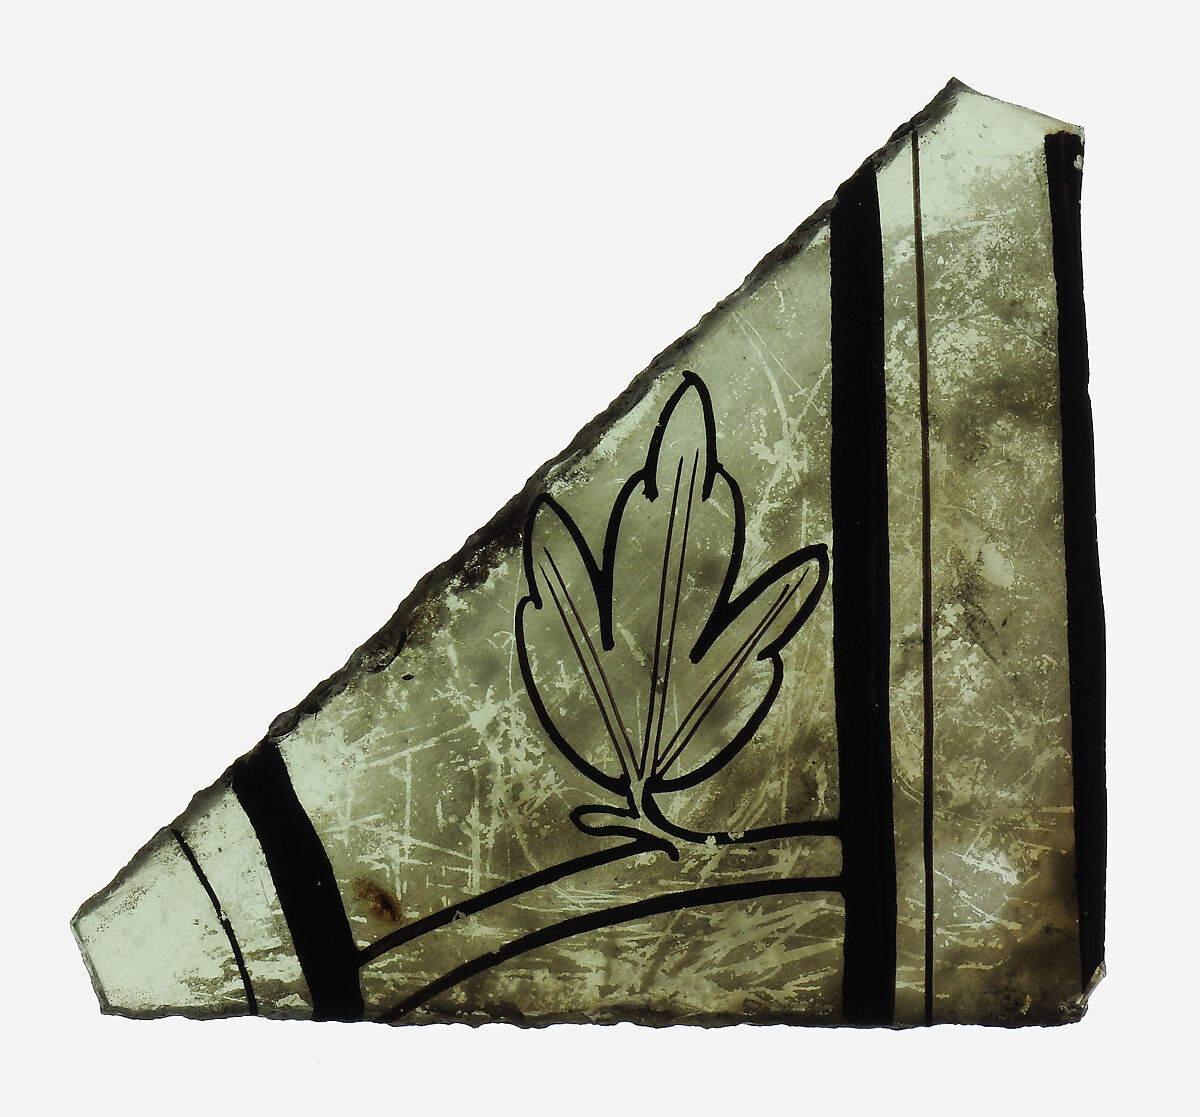 Glass Fragment, Glass, French 